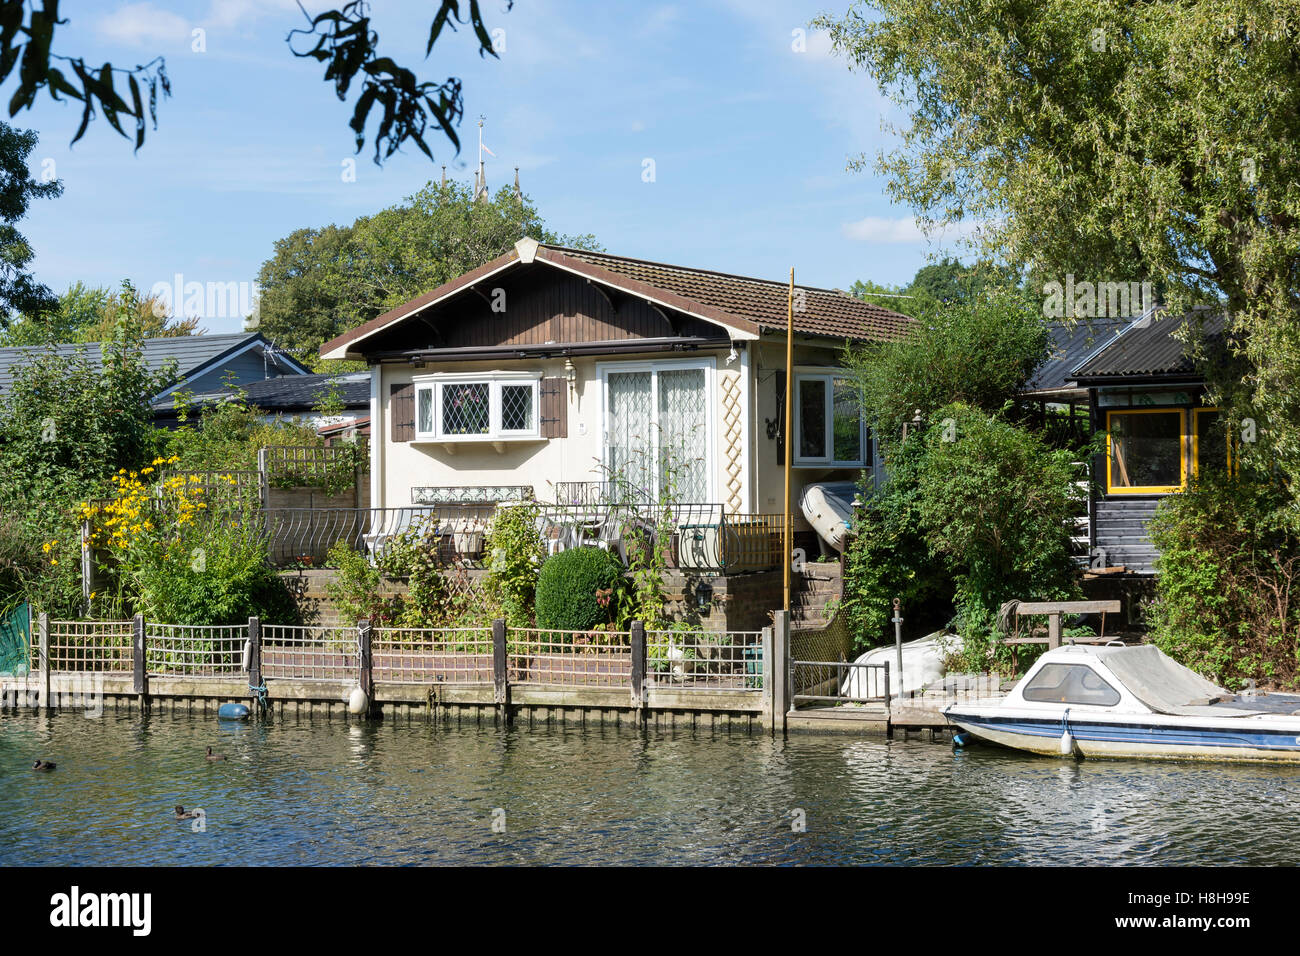 Riverside house sur Tagg's Island, Tamise, Hurst Park, West Molesey, Surrey, Angleterre, Royaume-Uni Banque D'Images